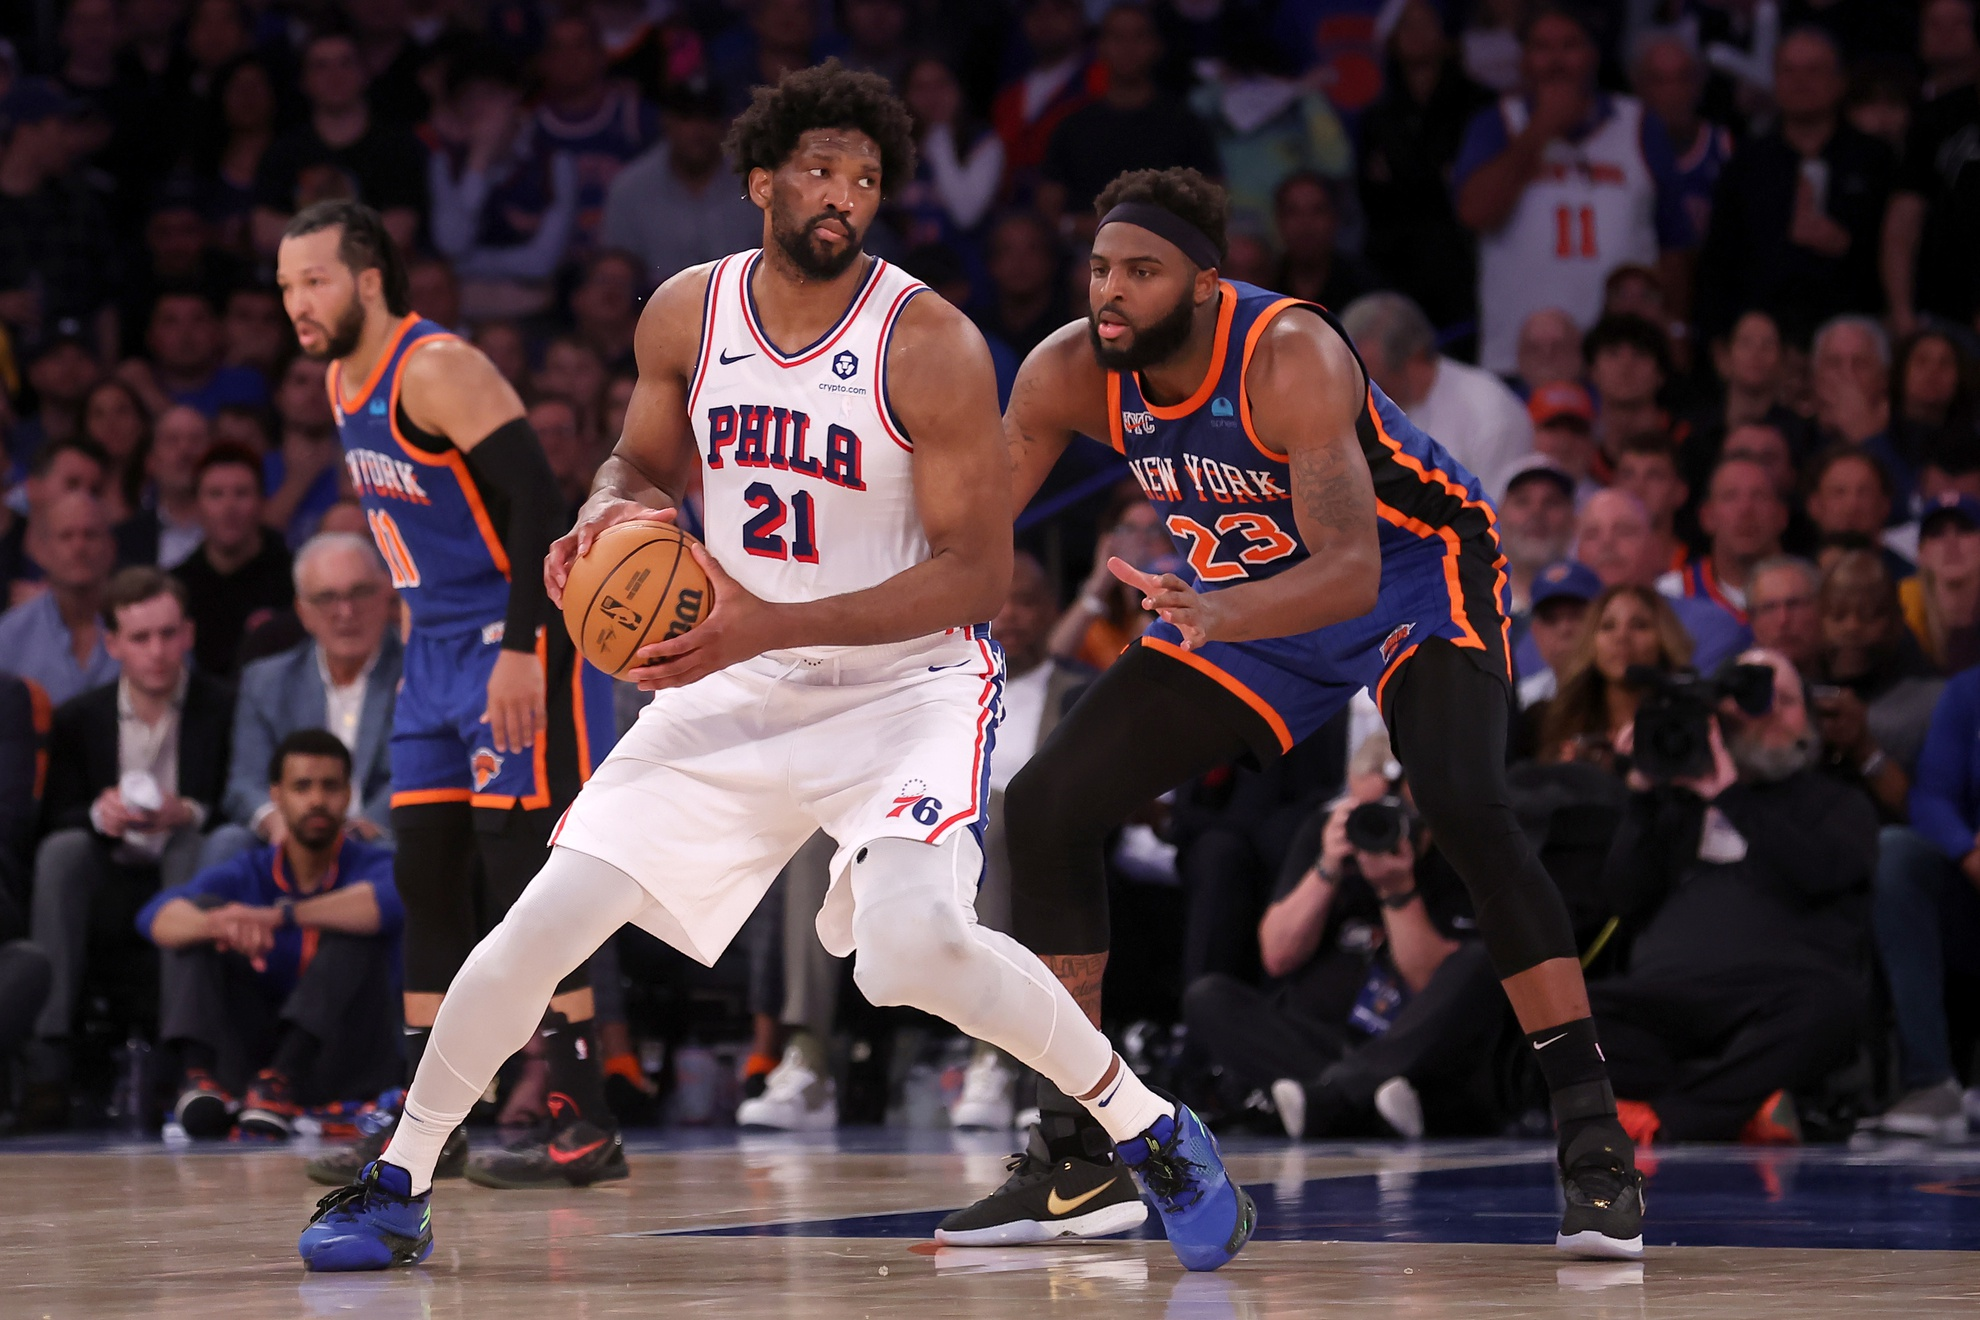 Sixers take on Knicks in Game 6 with home court advantage, fresh off incredible Game 5 win in New York